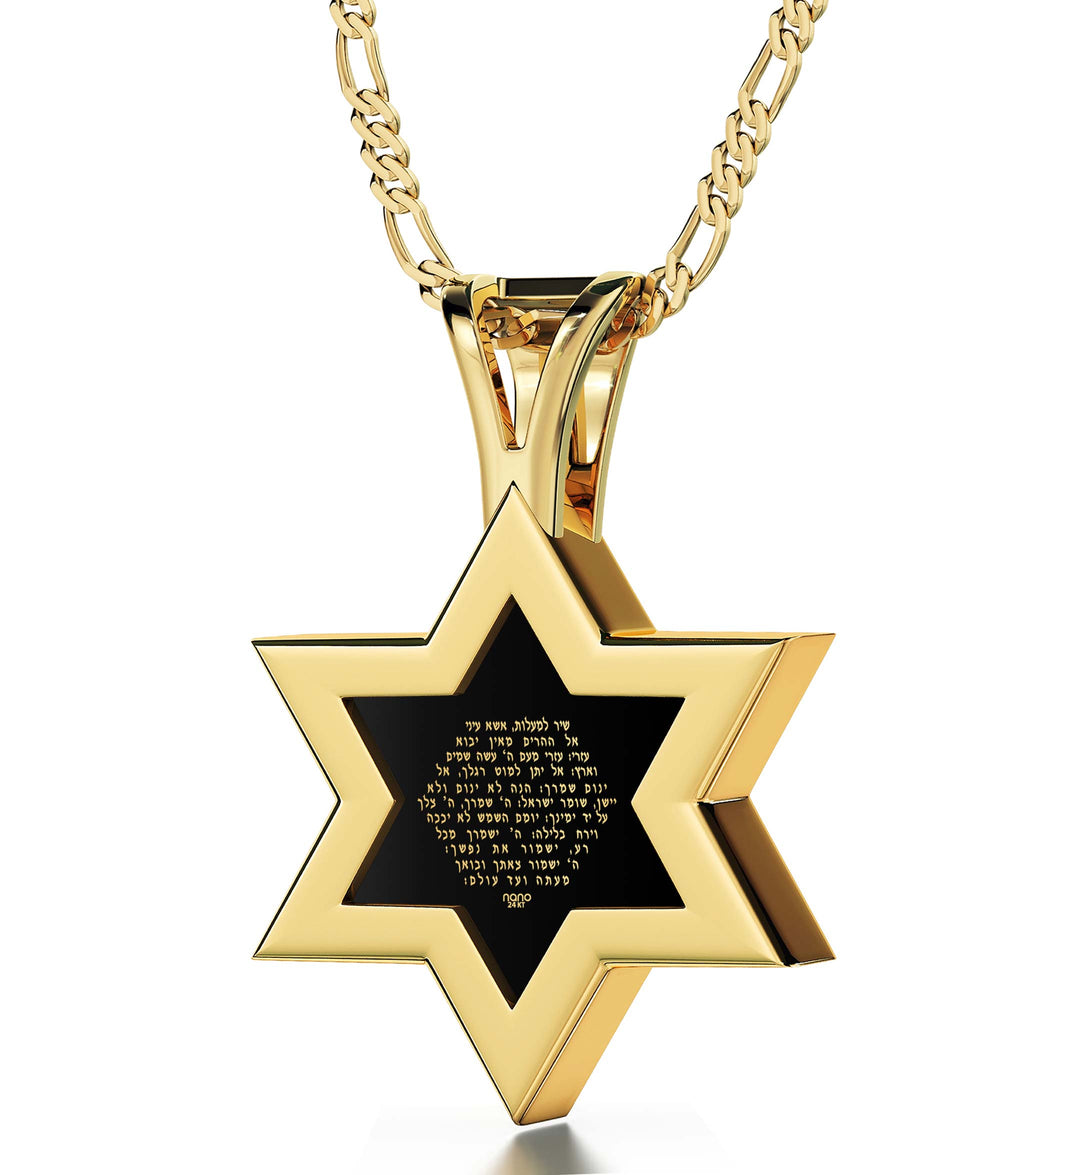 Men's Star of David Necklace 24k Gold Inscribed Shir Lama'a lot Pendant on Onyx